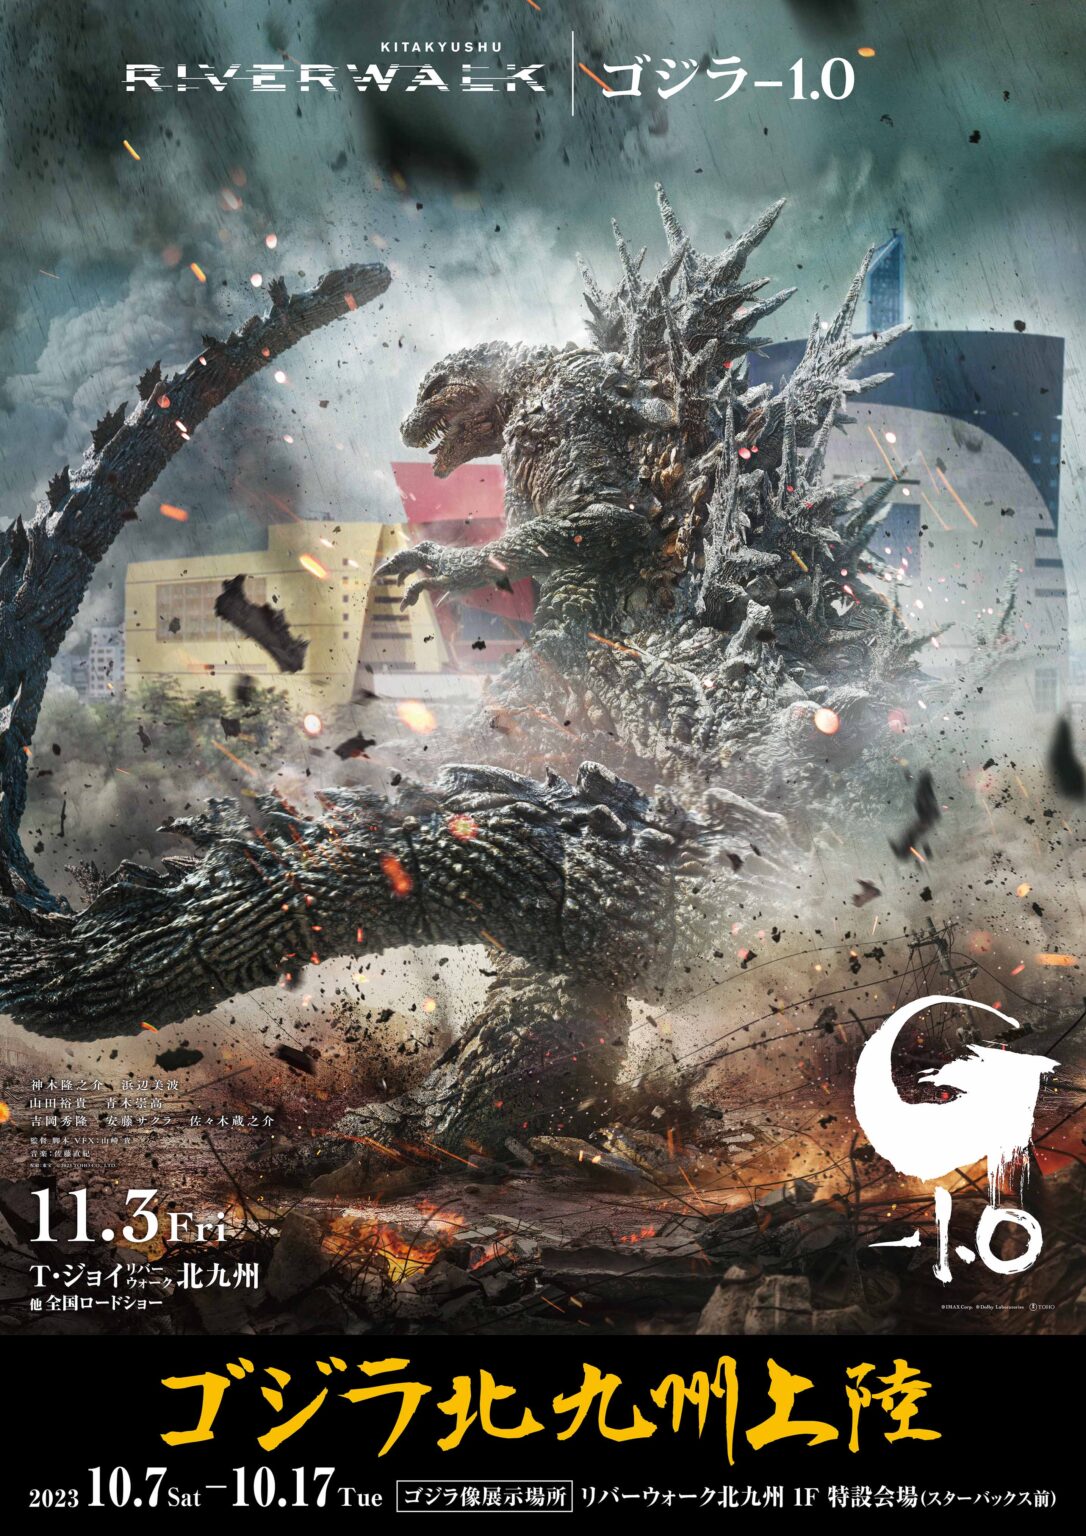 Kaiju News Outlet on X: Godzilla: Planet of the Monsters was released in  Japanese theaters 5 years ago today.  / X